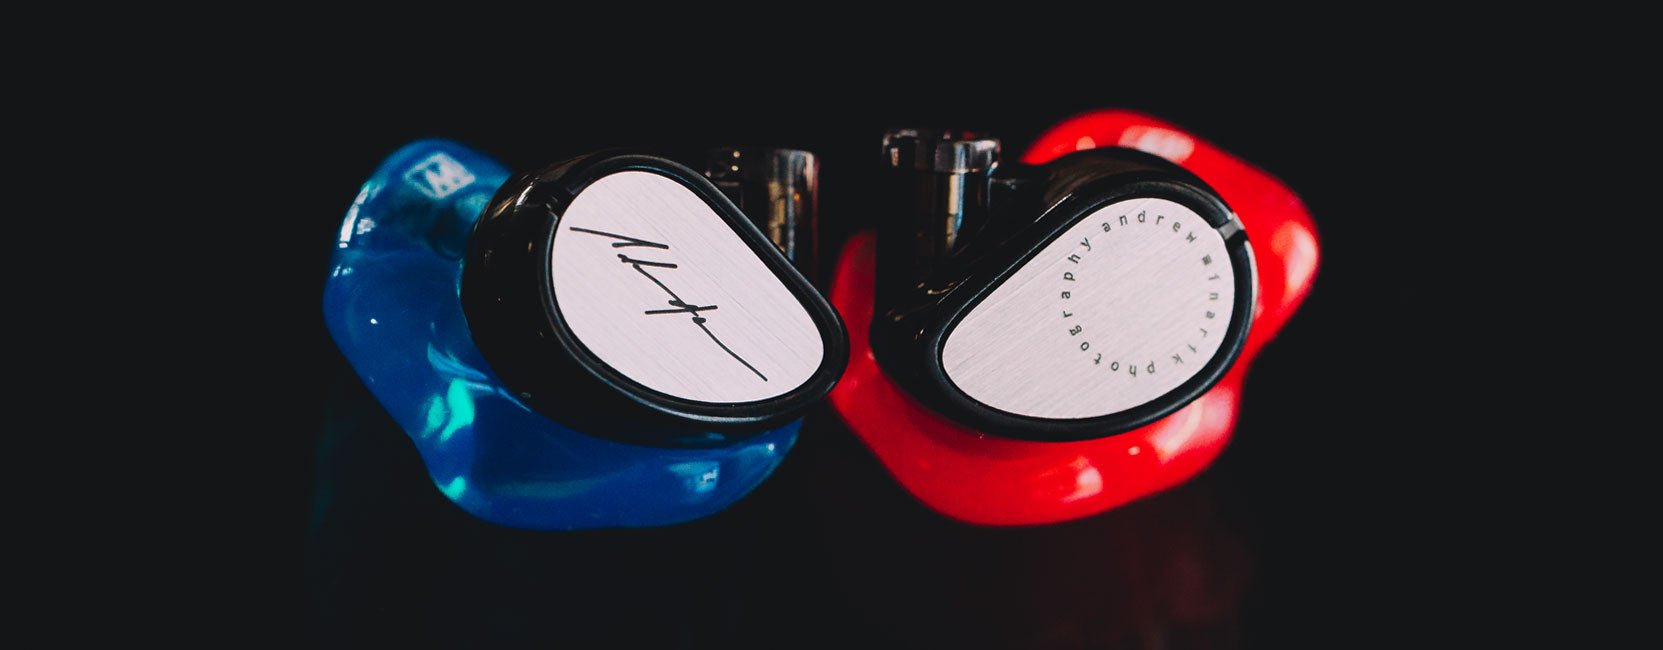 Customized MX PRO modular in ear monitors with custom-fit eartips and custom faceplates